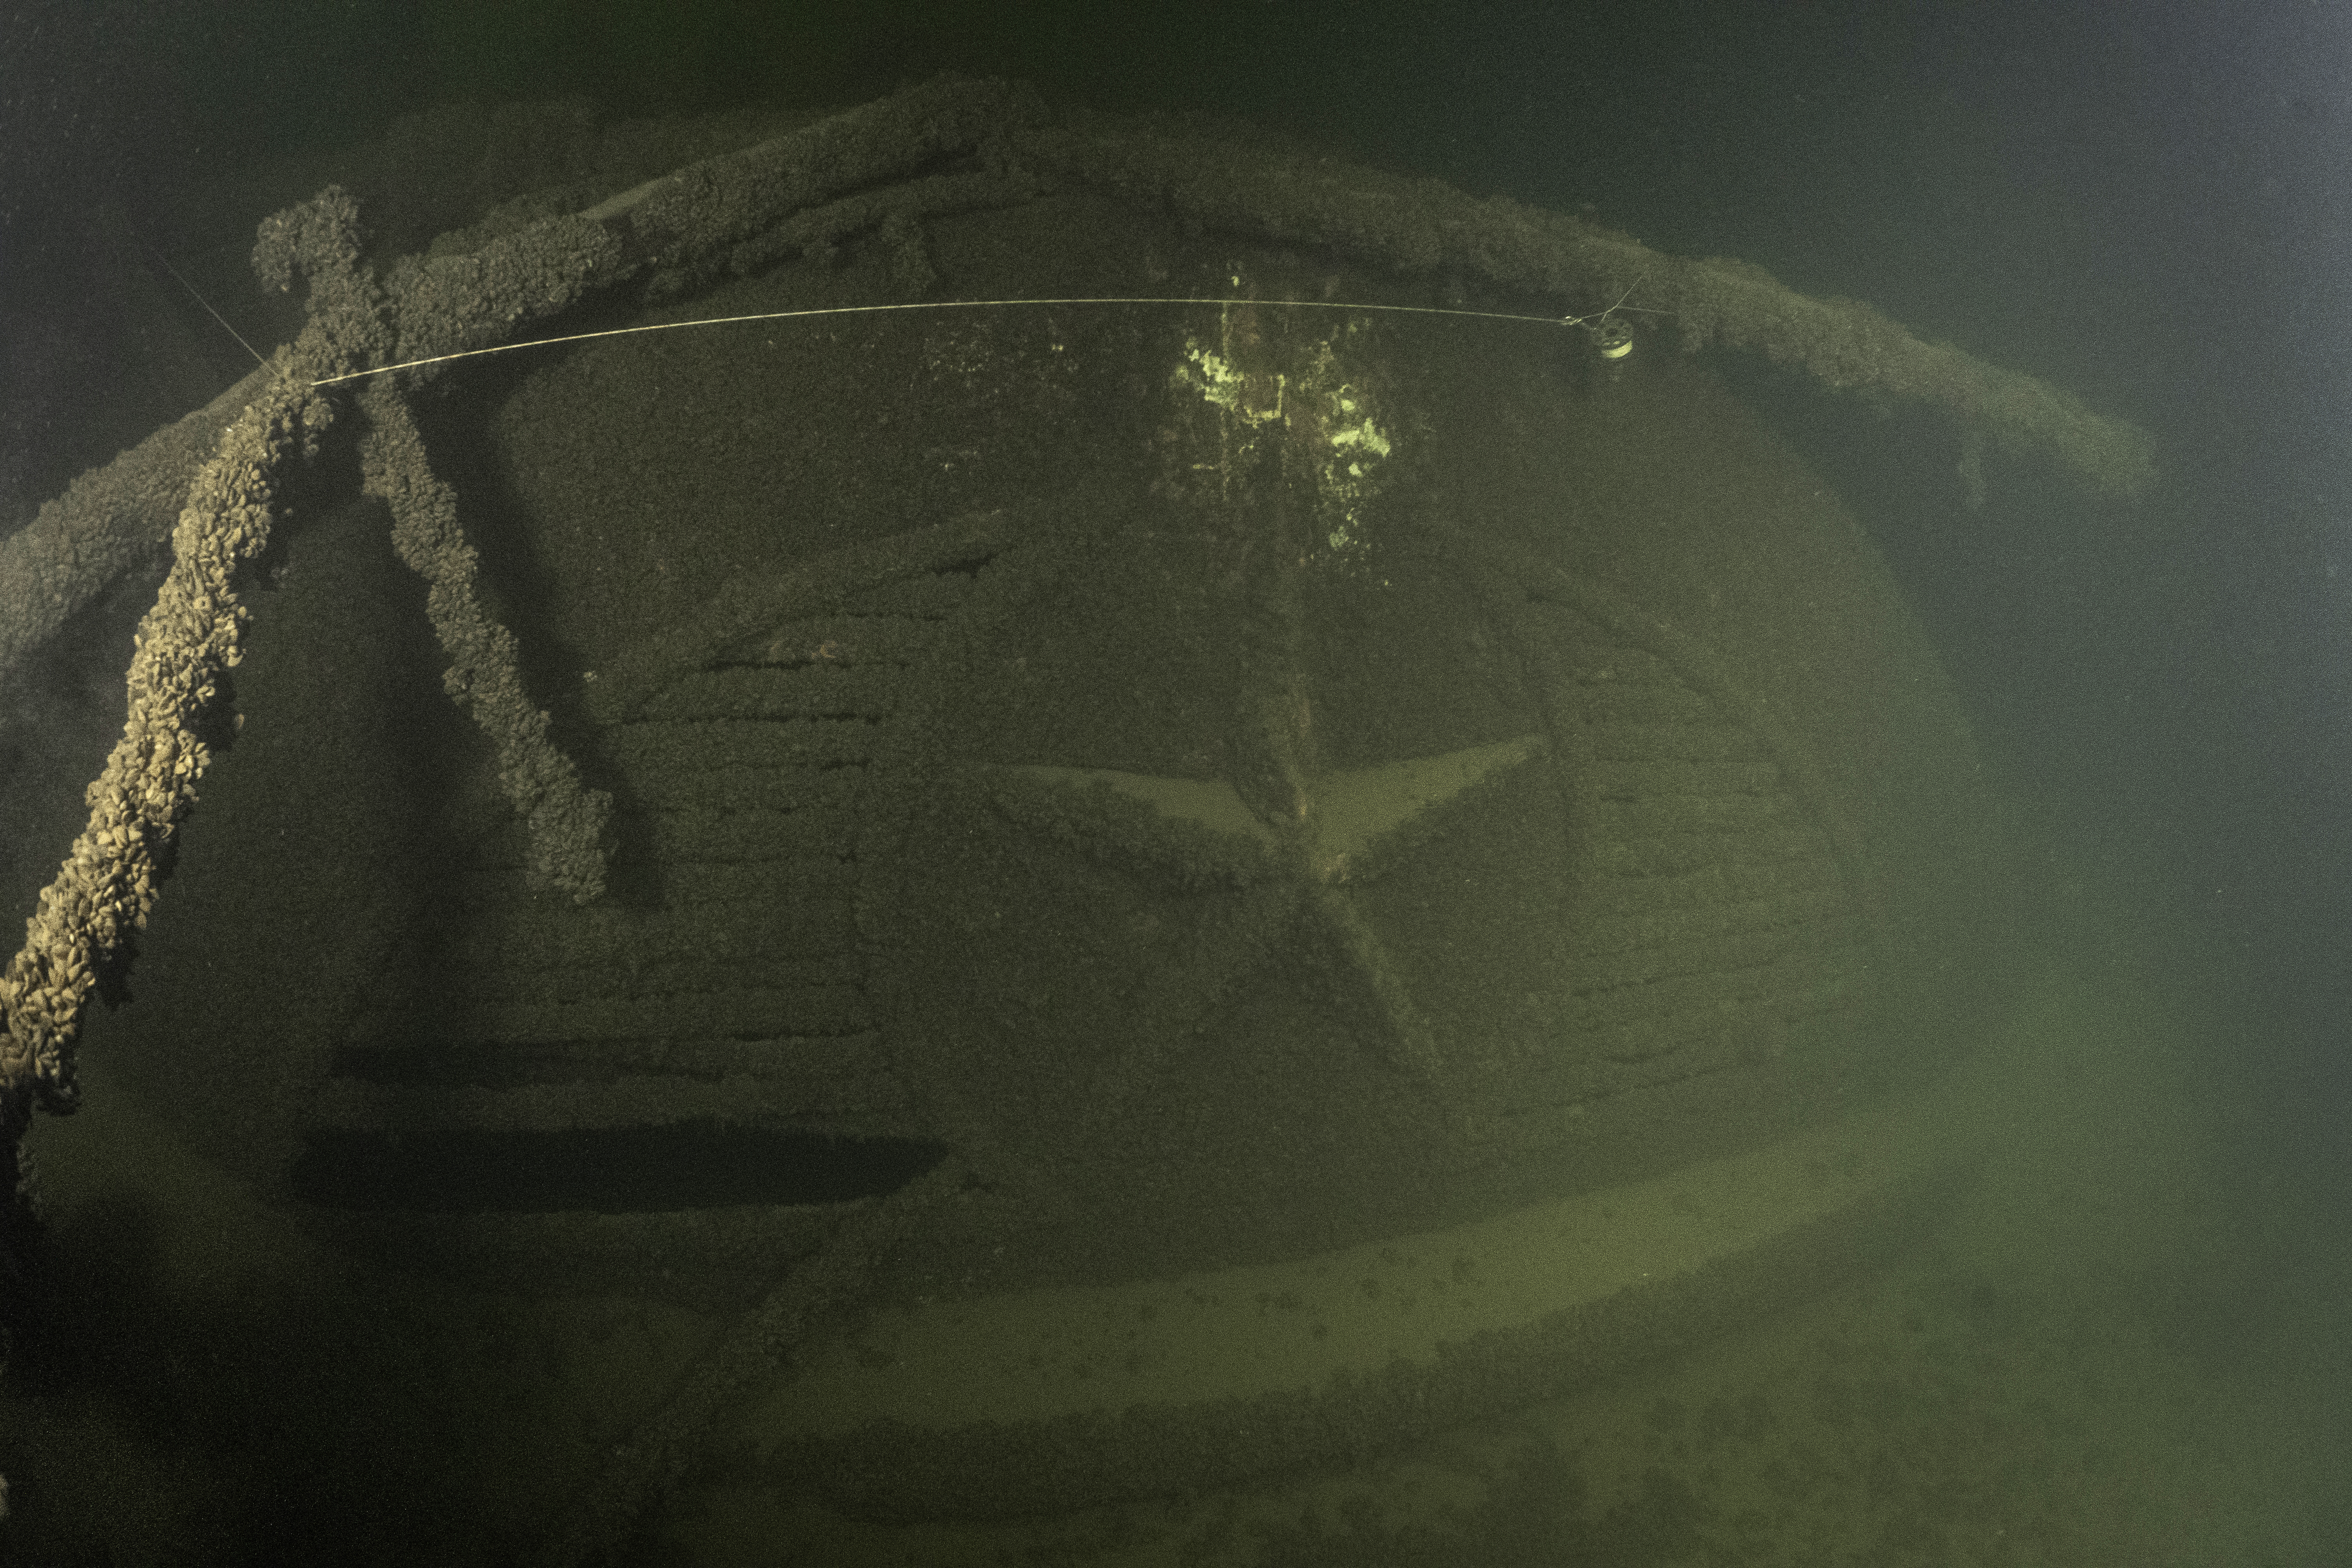 A star marked the paddlebox of the paddle wheel